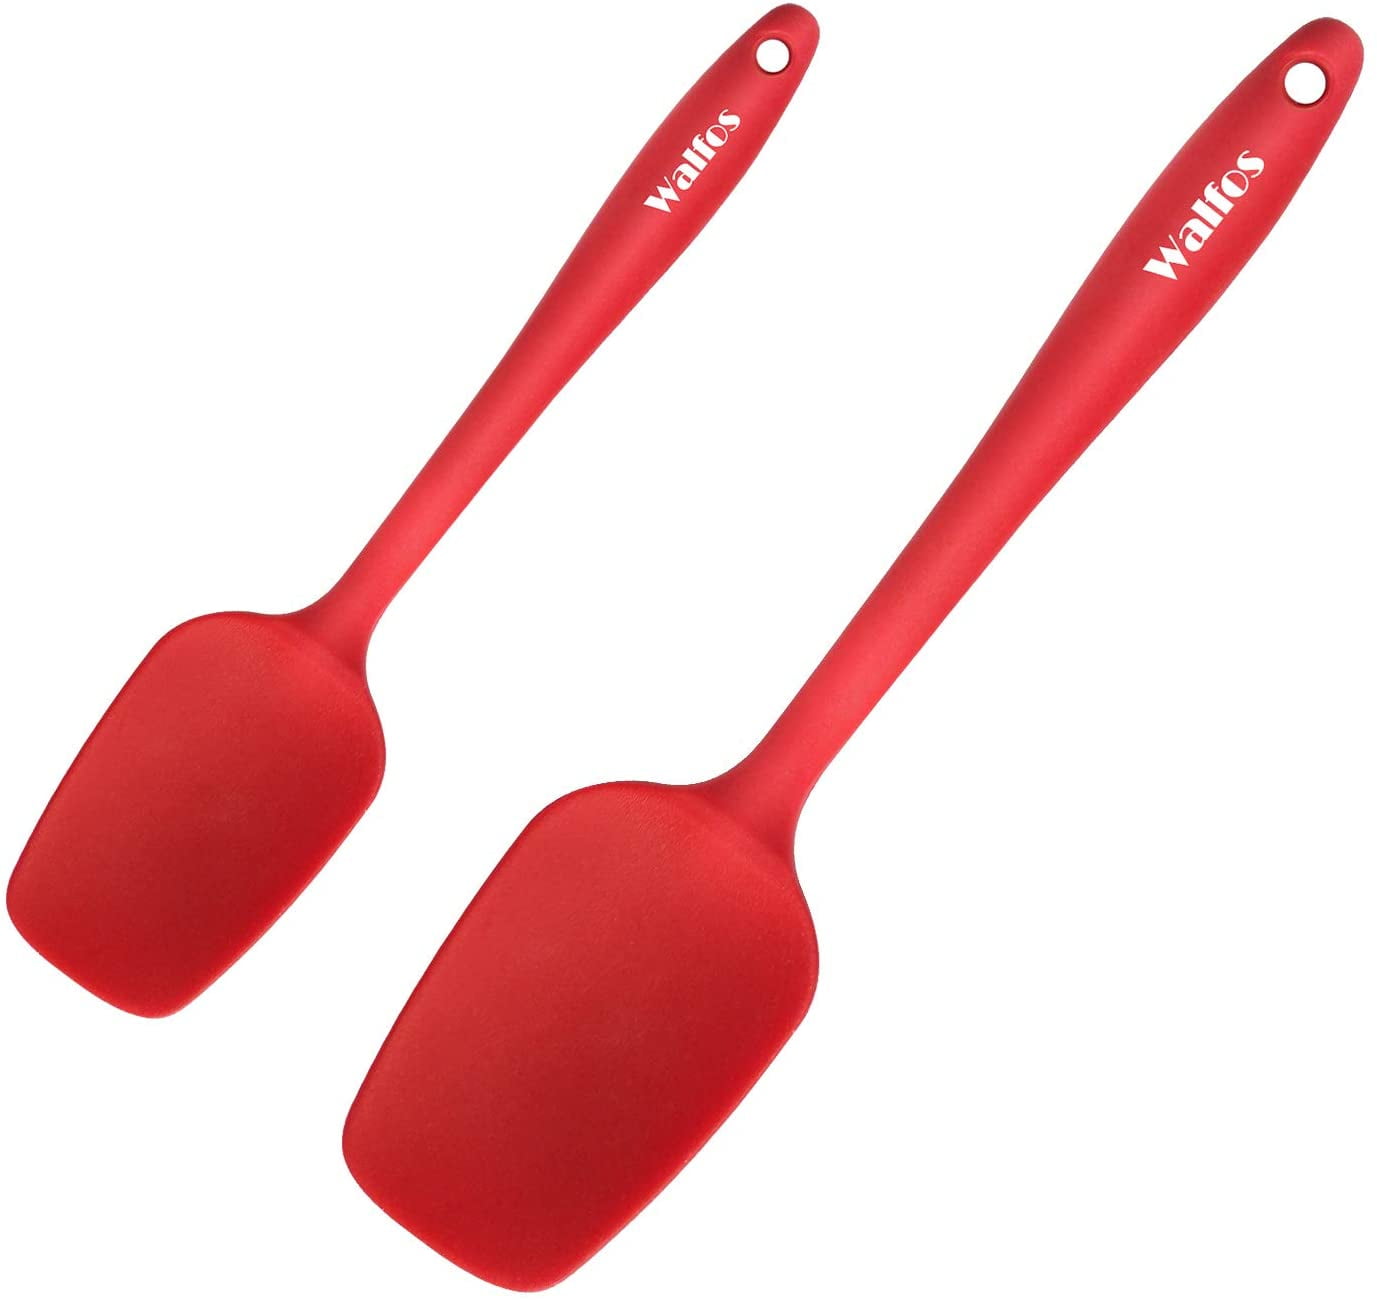 Premium Silicone Spatulas & Spoon with Steel Core-BPA Free and Antibacterial-Red 